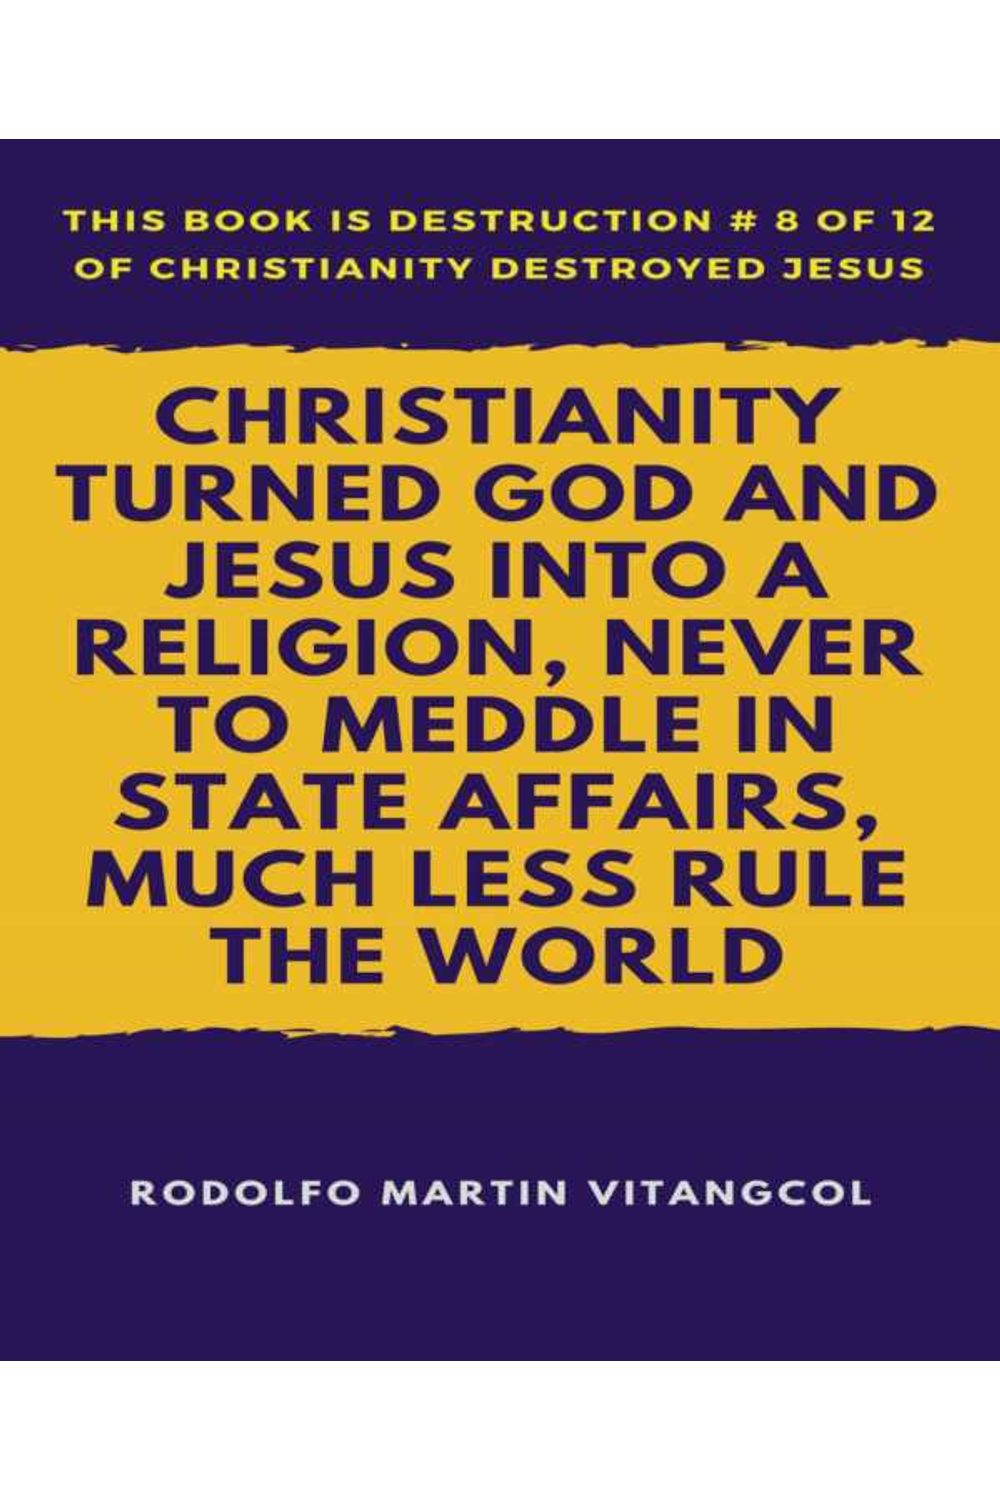 bw-christianity-turned-god-and-jesus-into-a-religion-never-to-meddle-in-state-affairs-much-less-rule-the-world-bookrix-9783743894006